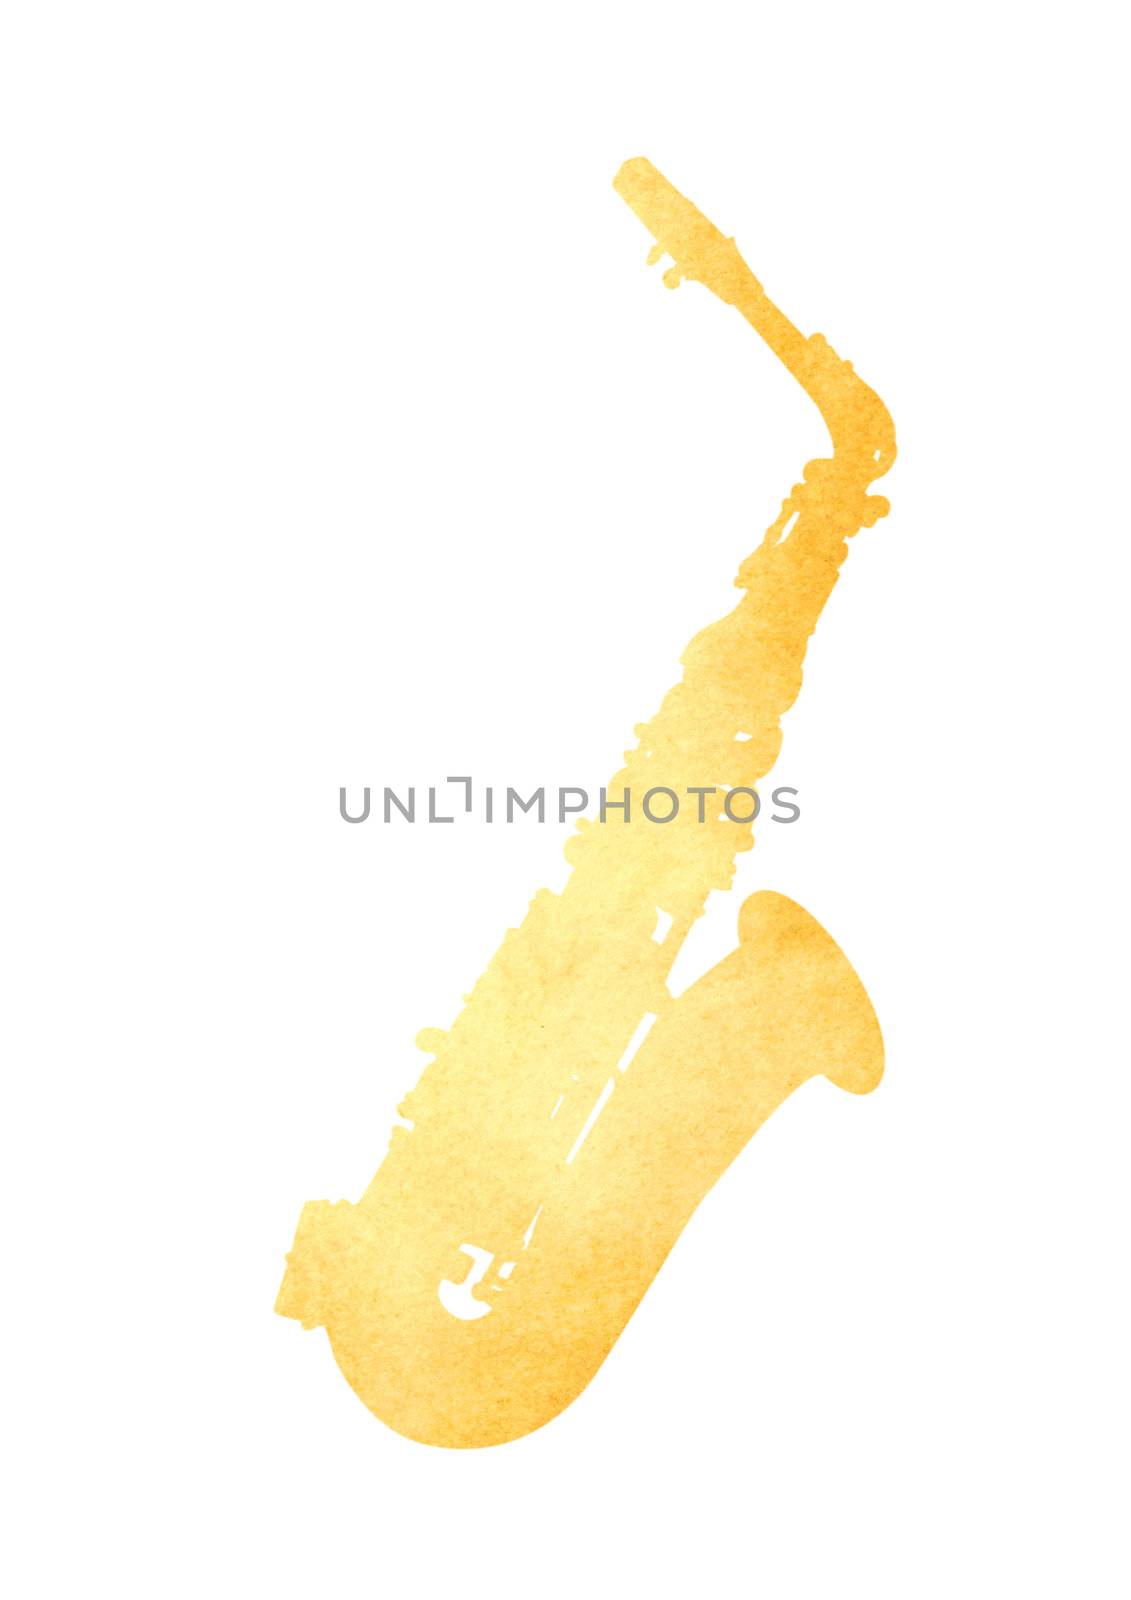 Grunge image of saxophone from old paper isolated on white